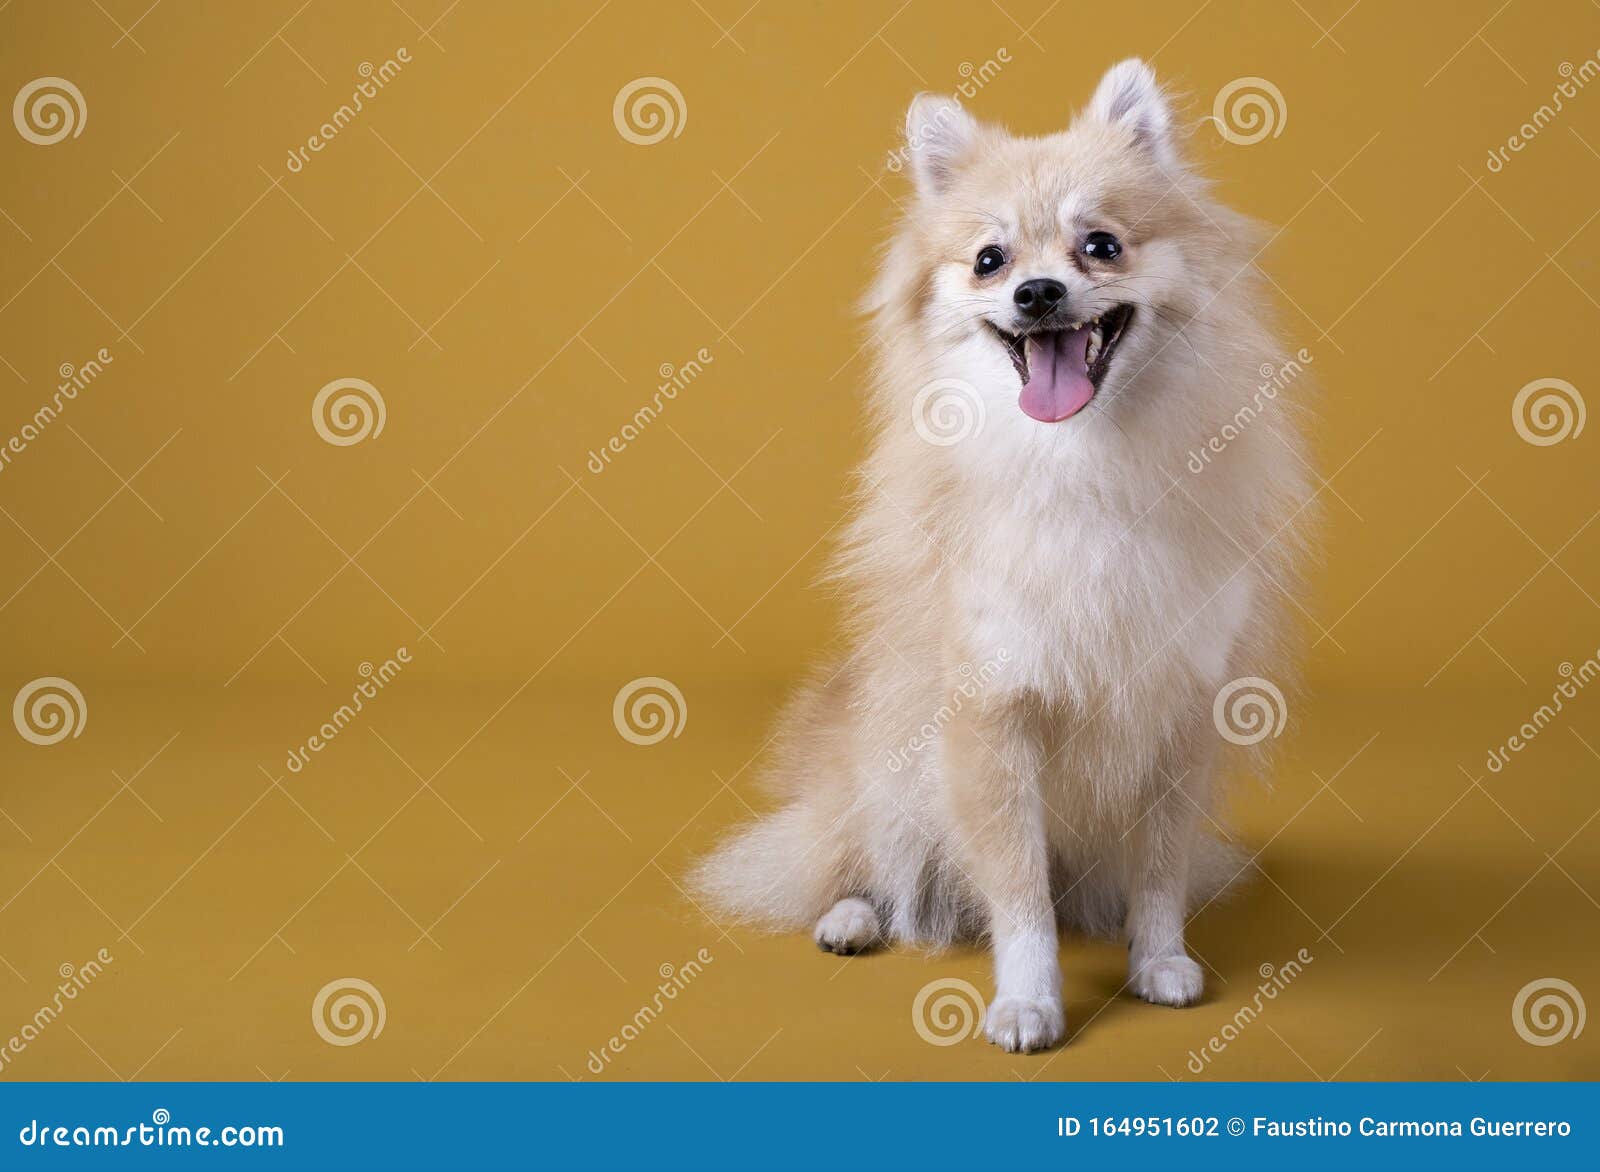 Pomeranian Breed Dog Lying With Its Head Raised And Sticking Out Its Tongue On Yellow Background Stock Photo Image Of Mammals Pedigree 164951602